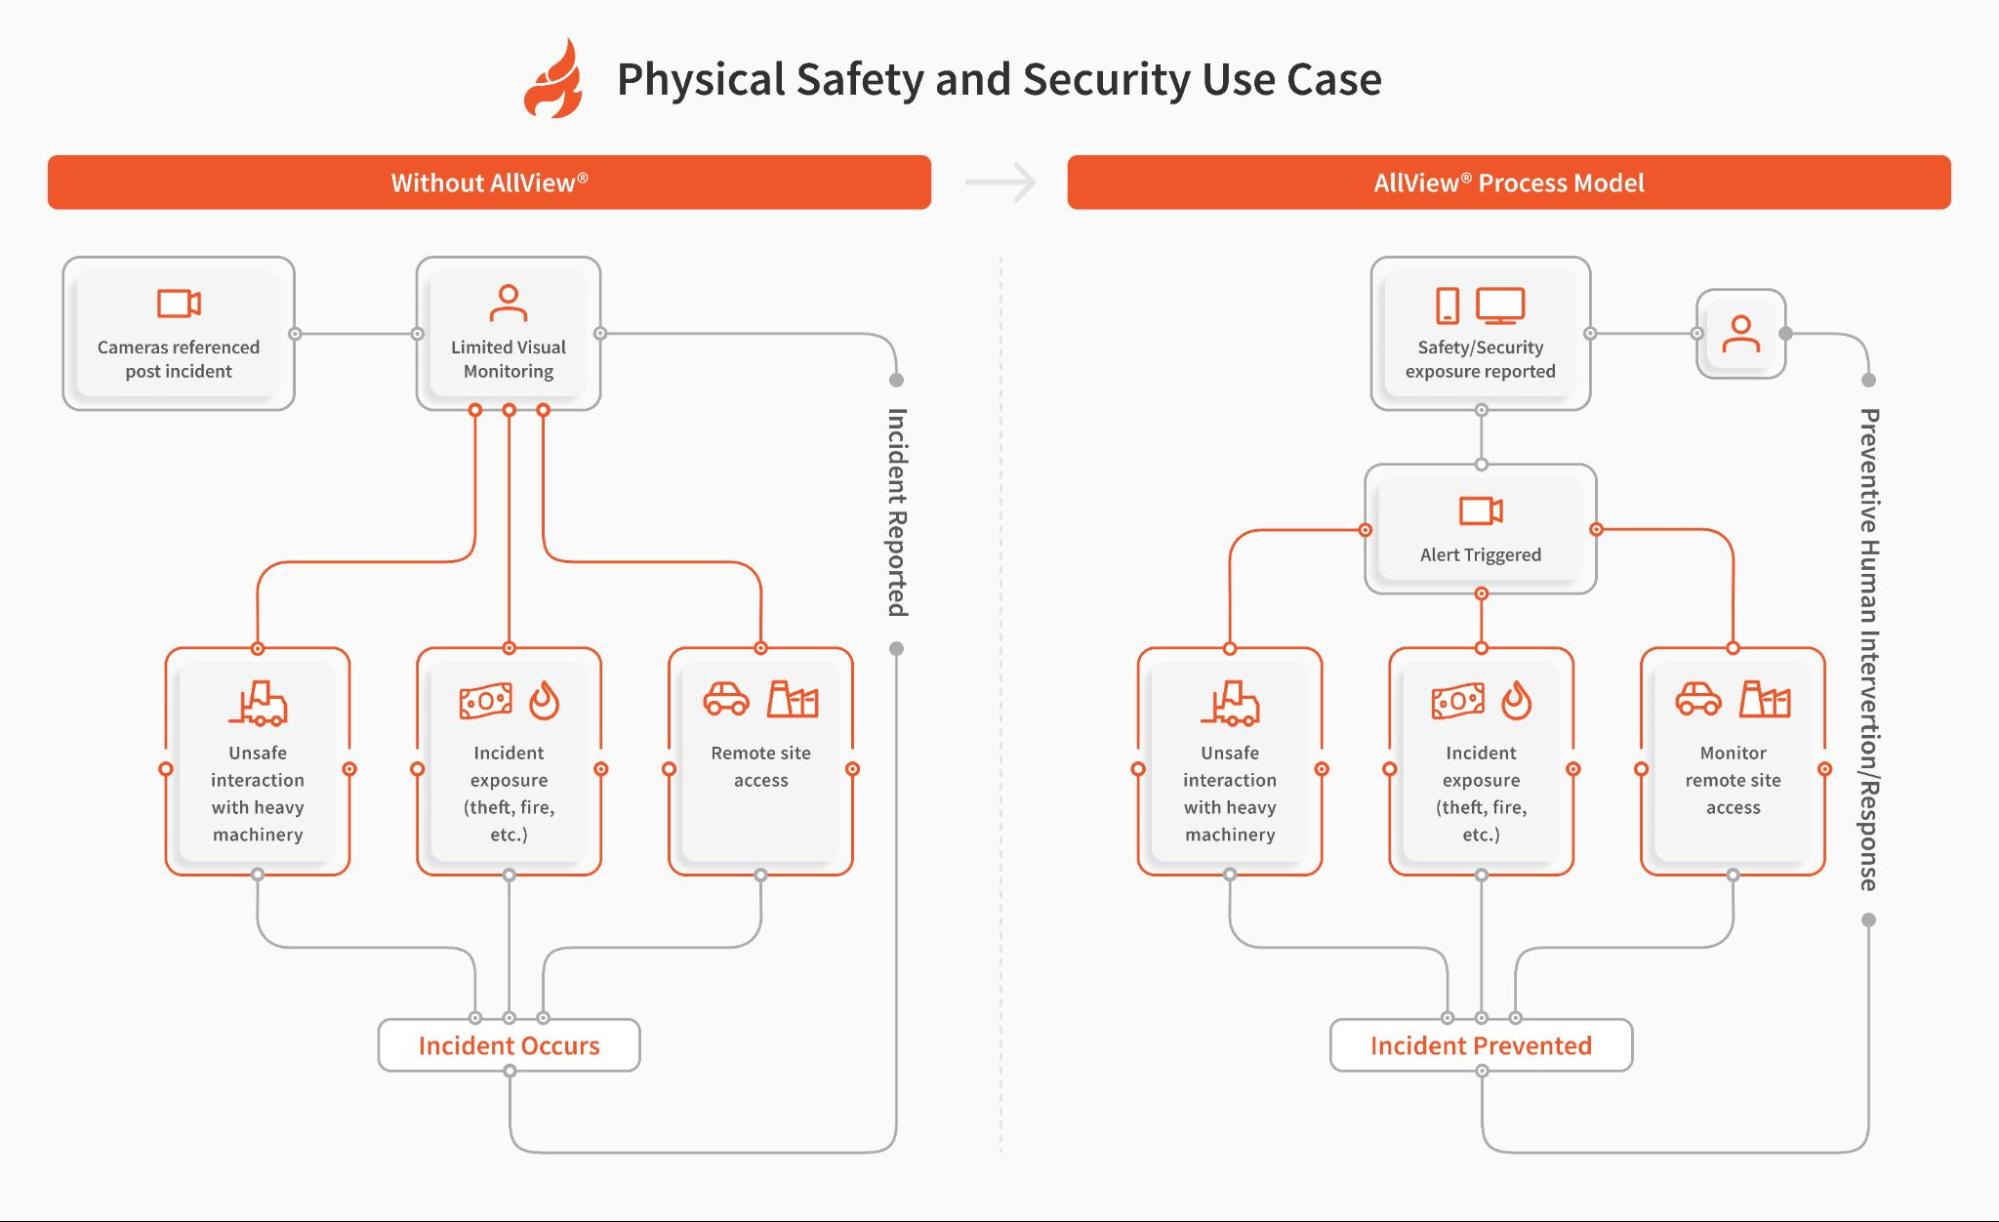 AllView - Physical Safety and Security Usecase